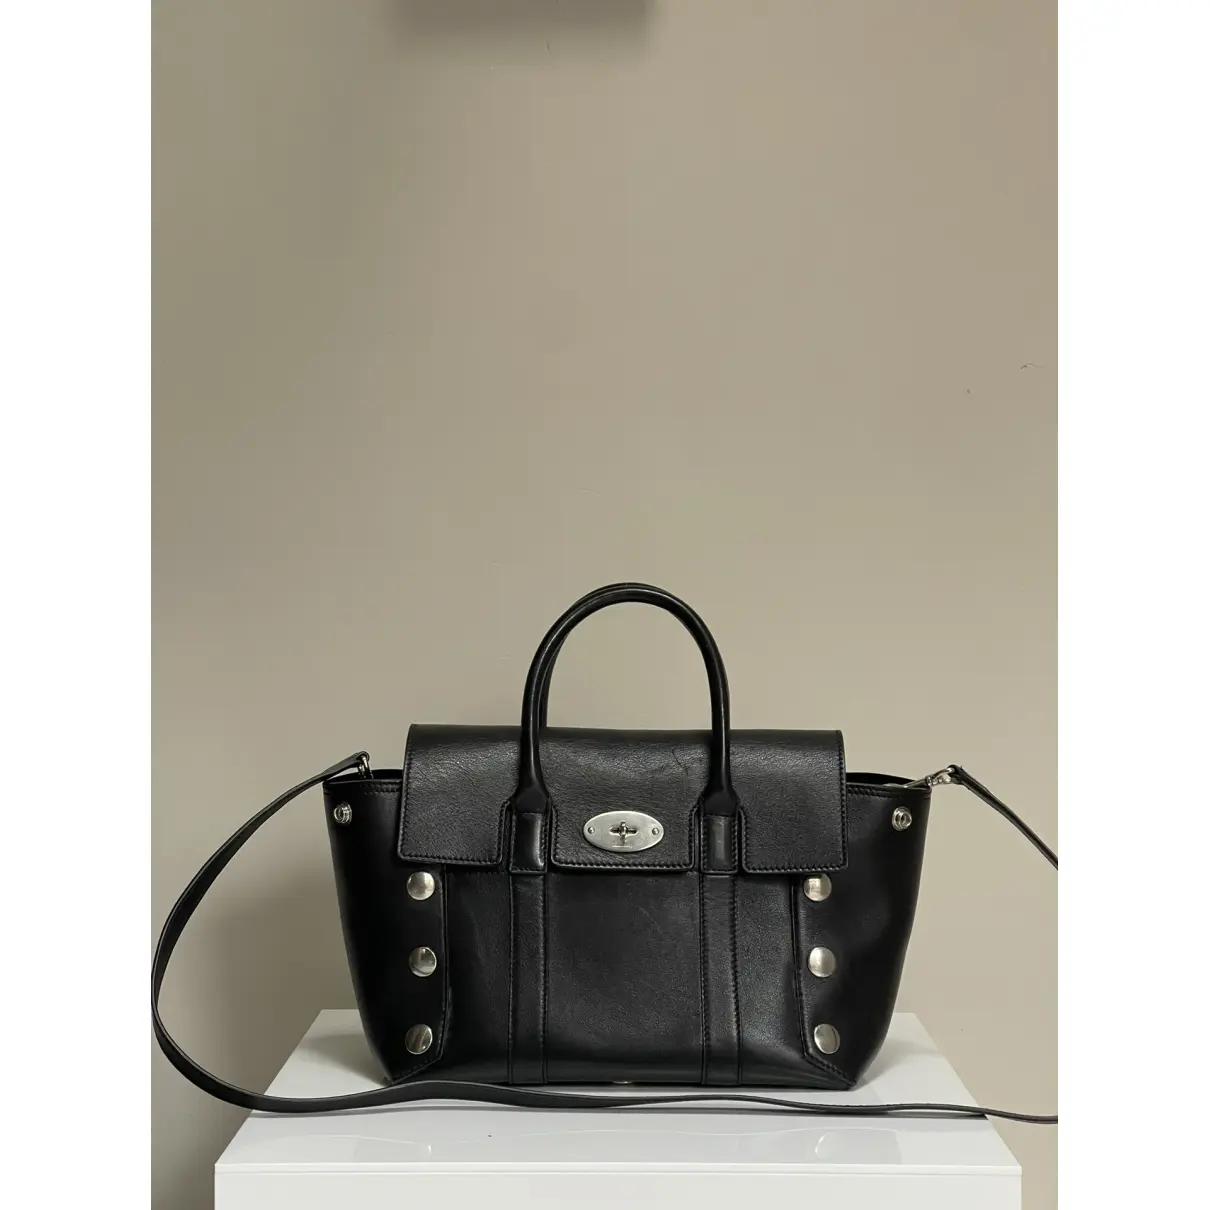 Buy Mulberry Bayswater Small leather crossbody bag online